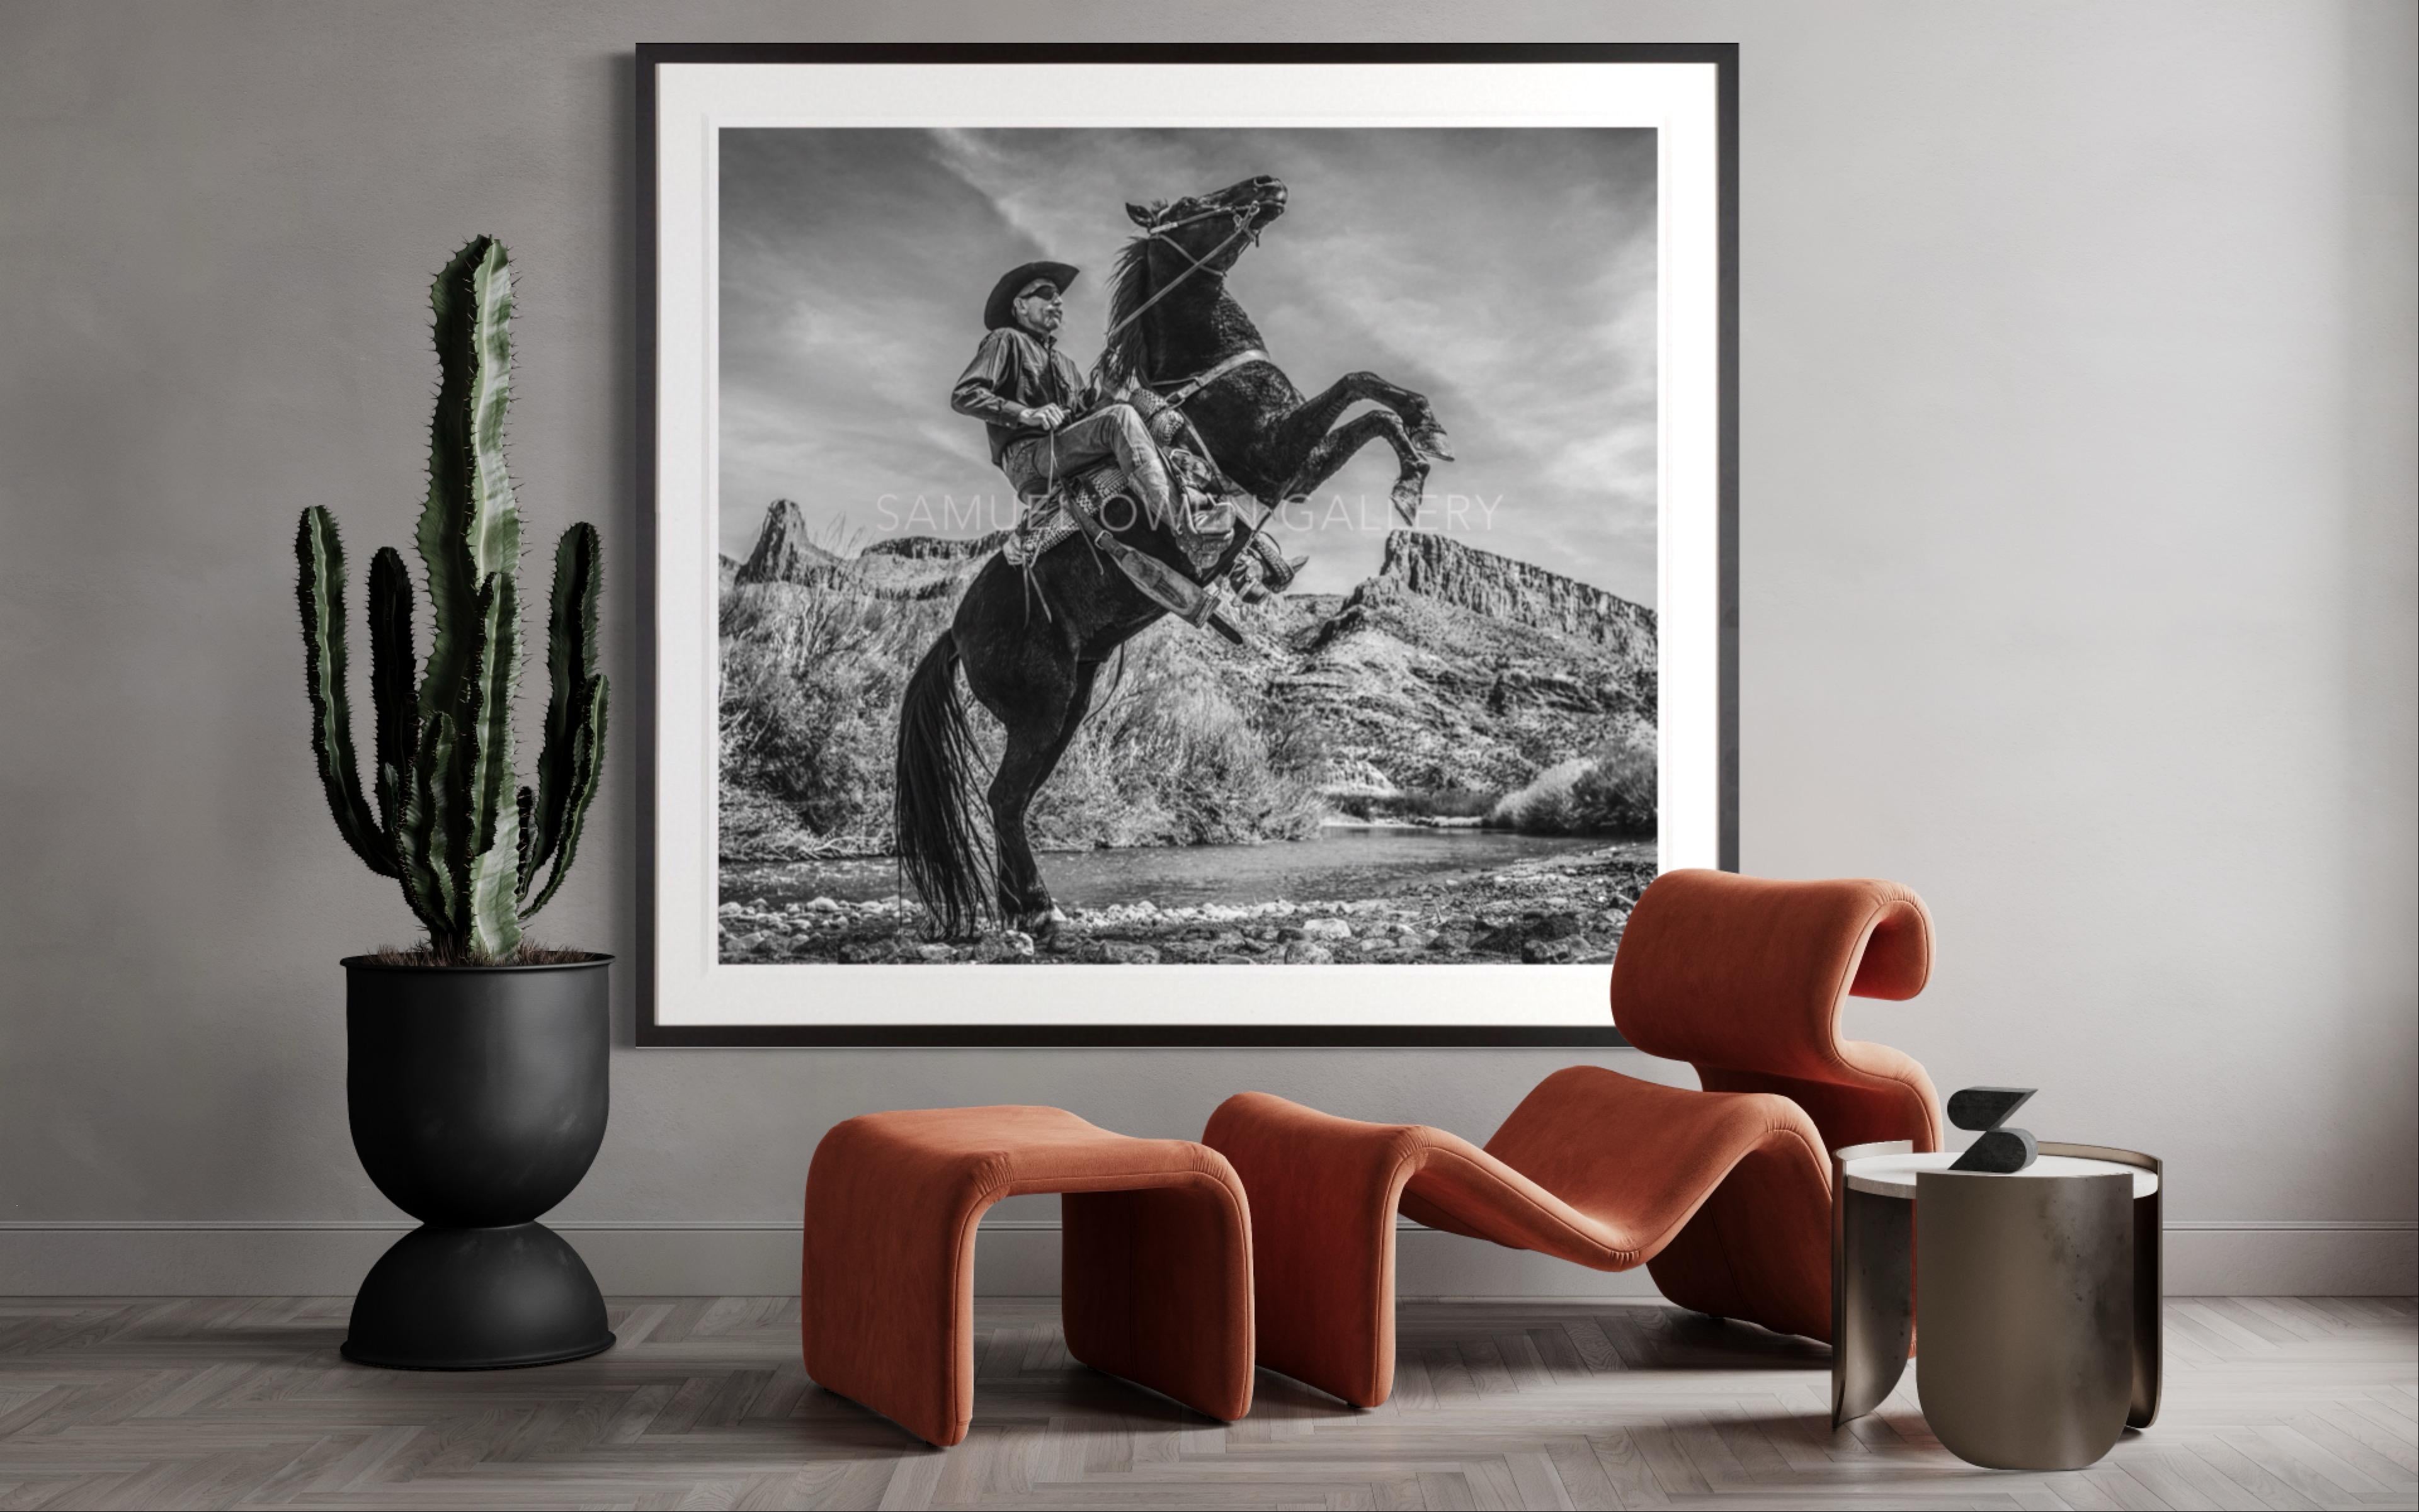 Living Without Boarders / West Texas Cowboy Rio Grande / Black and White Photo - Photograph by David Yarrow